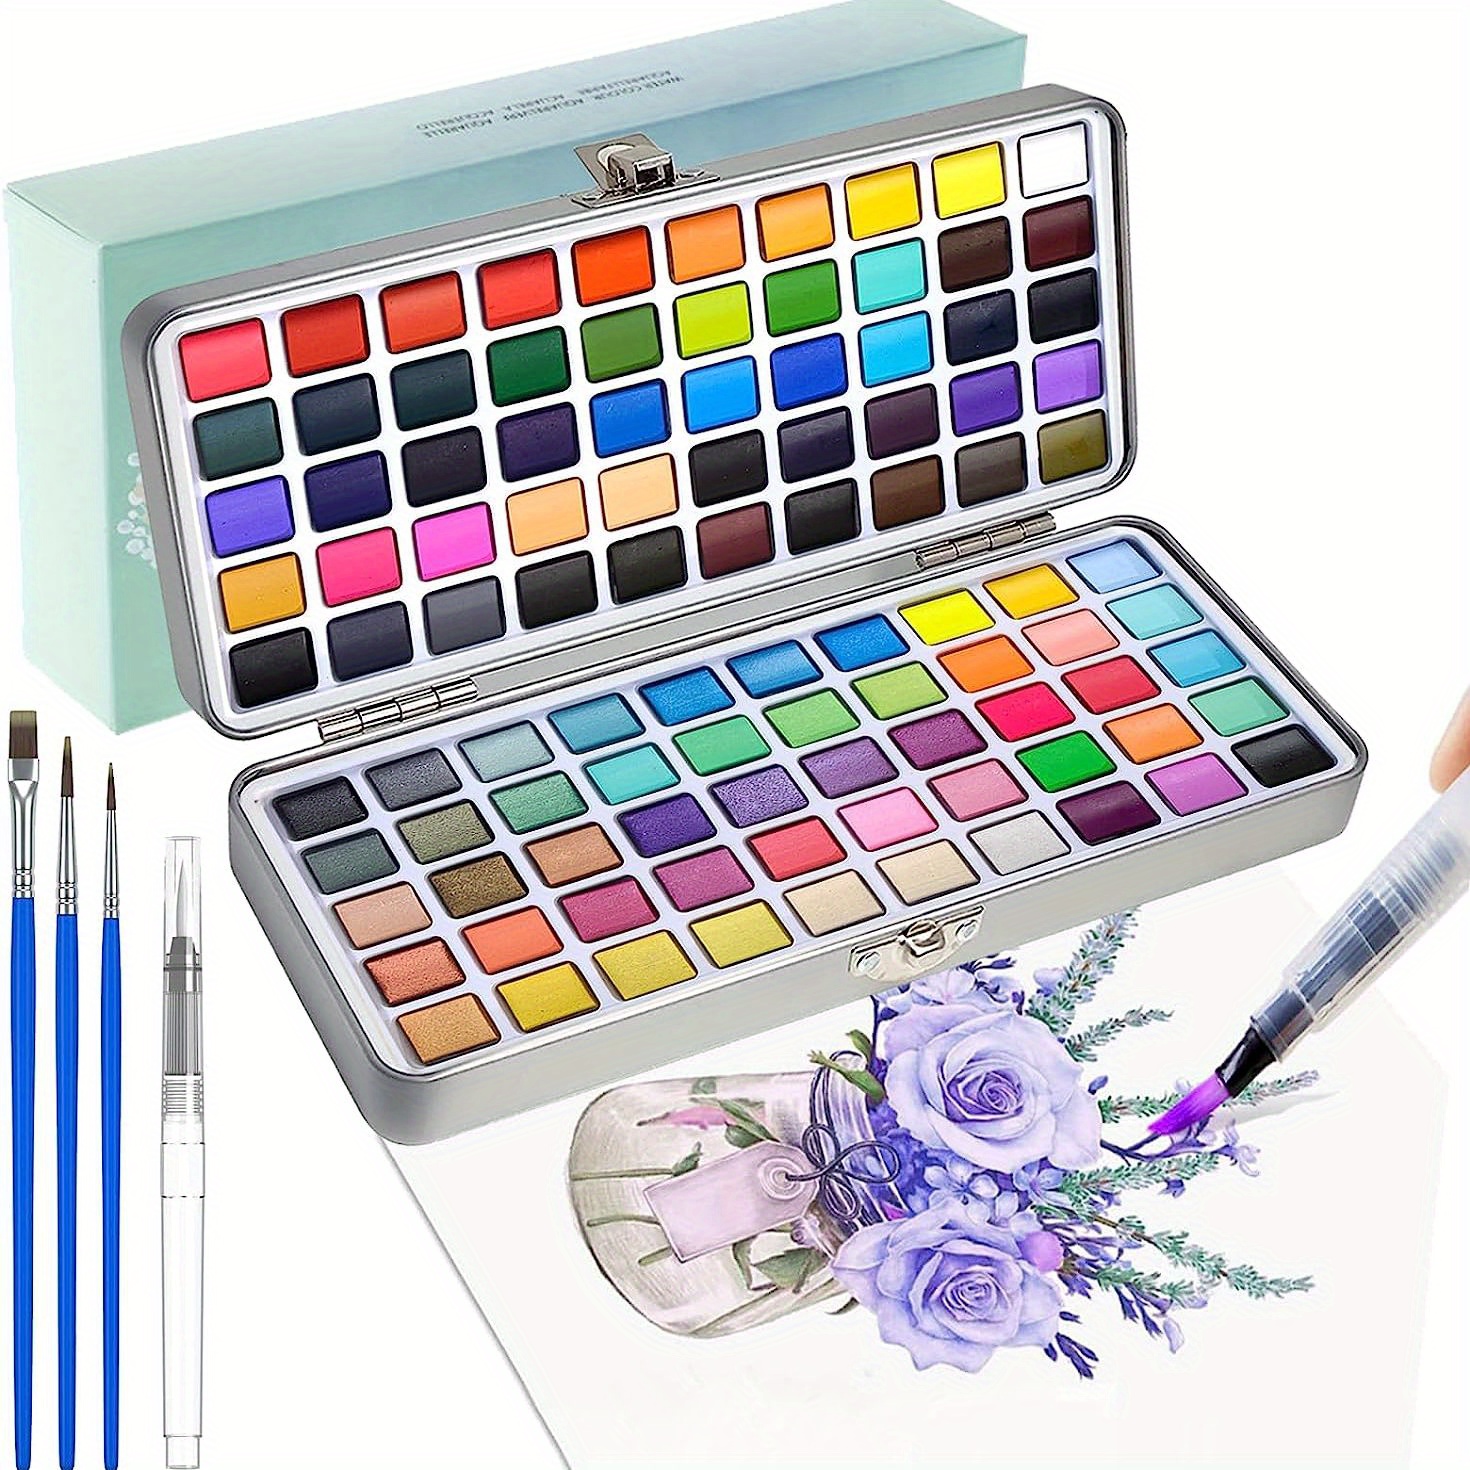  Gunsamg Watercolor Paint Set, 100 Colors Painting with